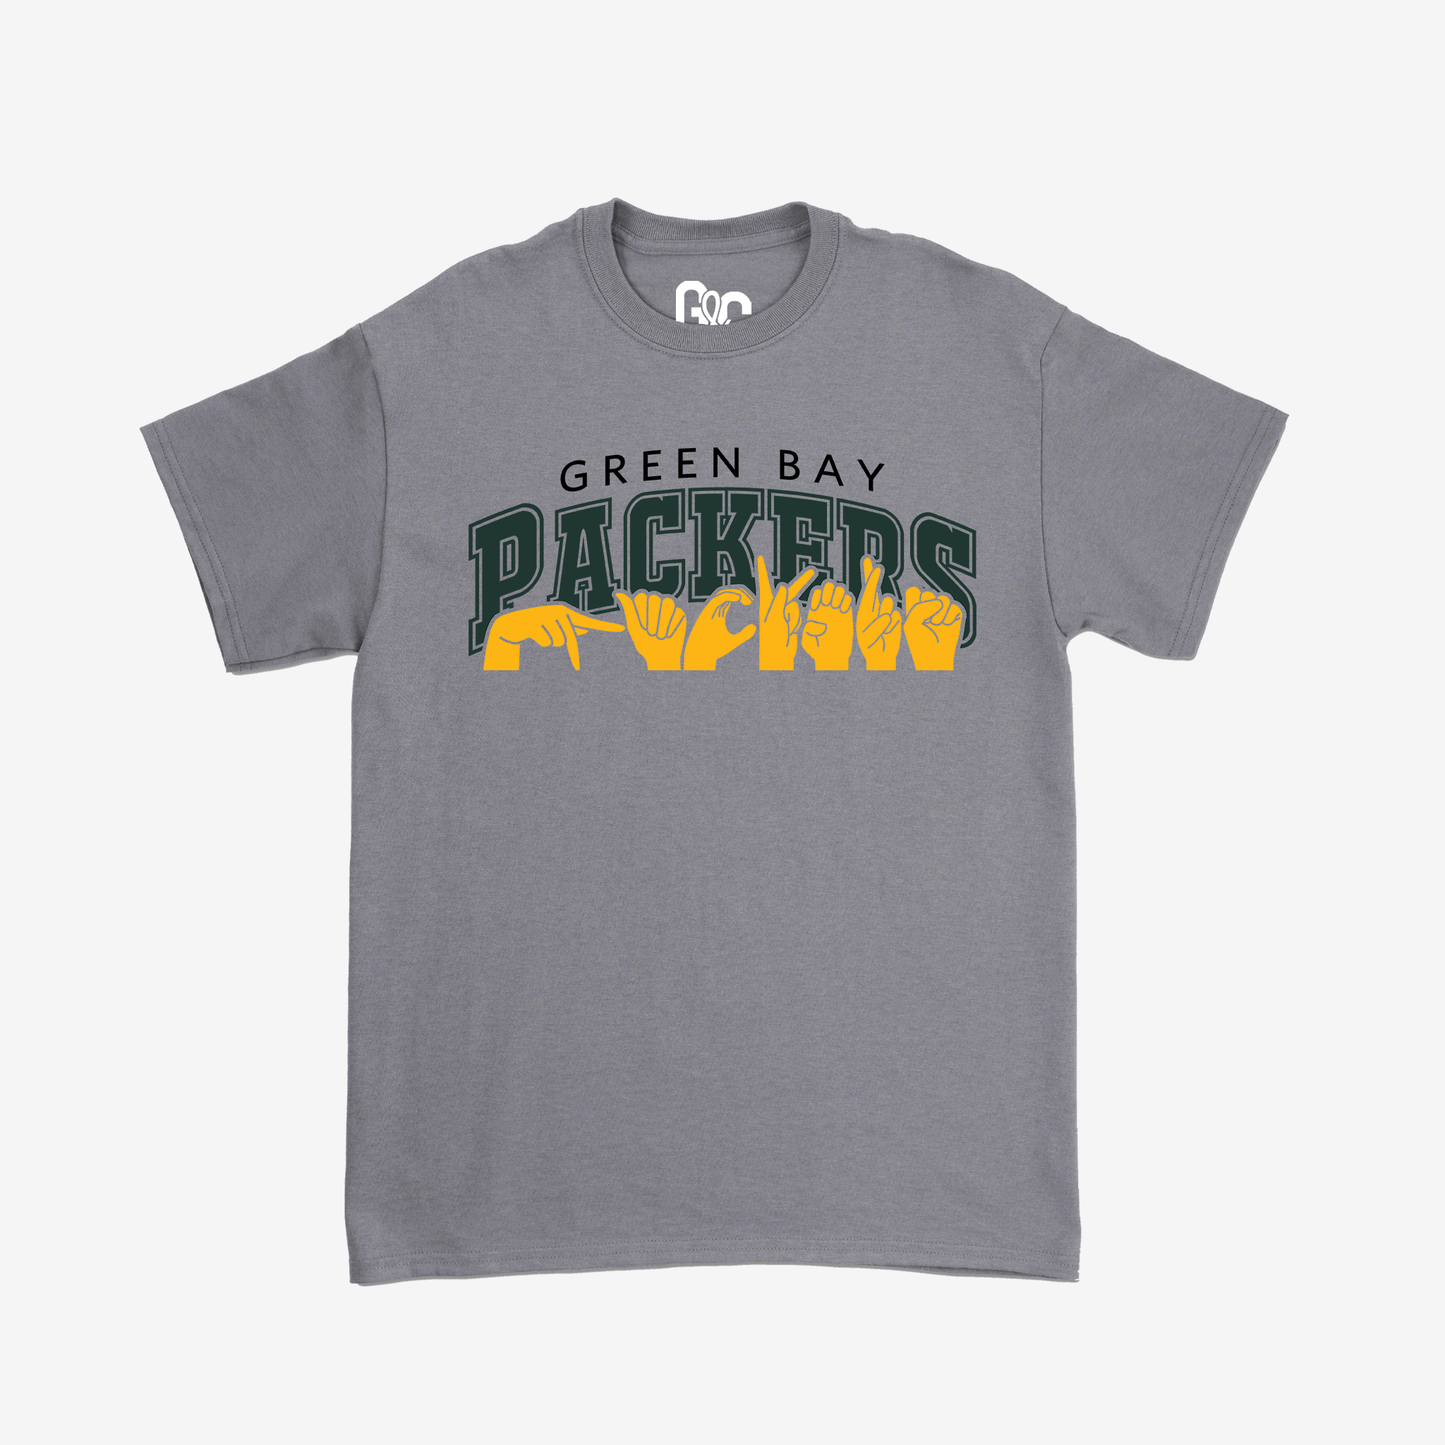 Green Bay Packers Youth Tee